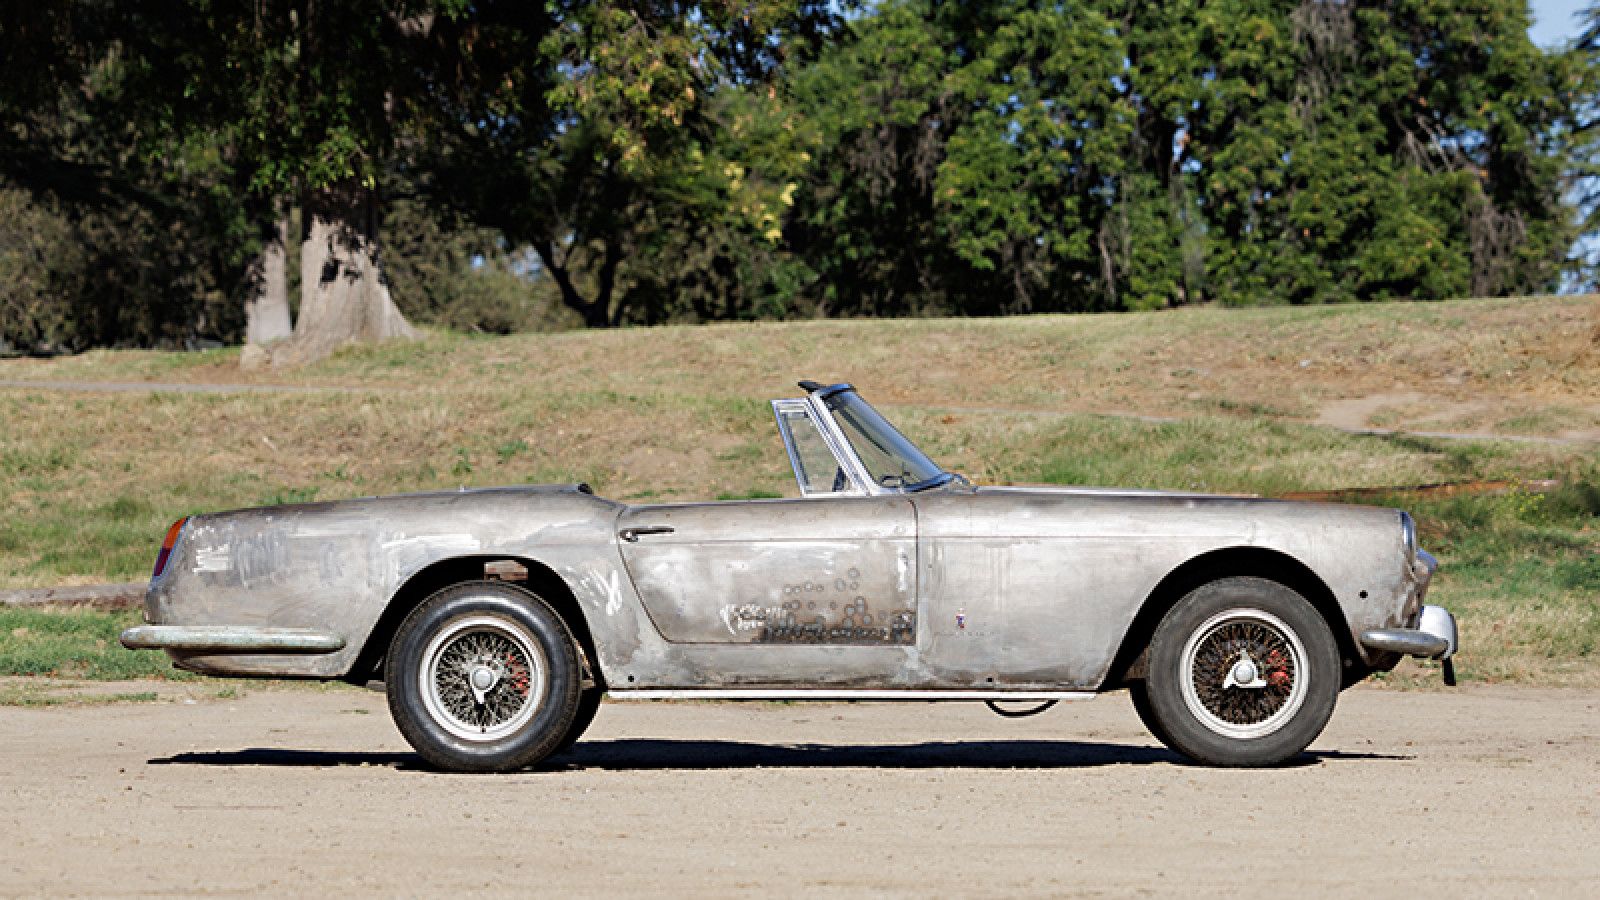 This barn-find Ferrari was a film star – now it’s for sale